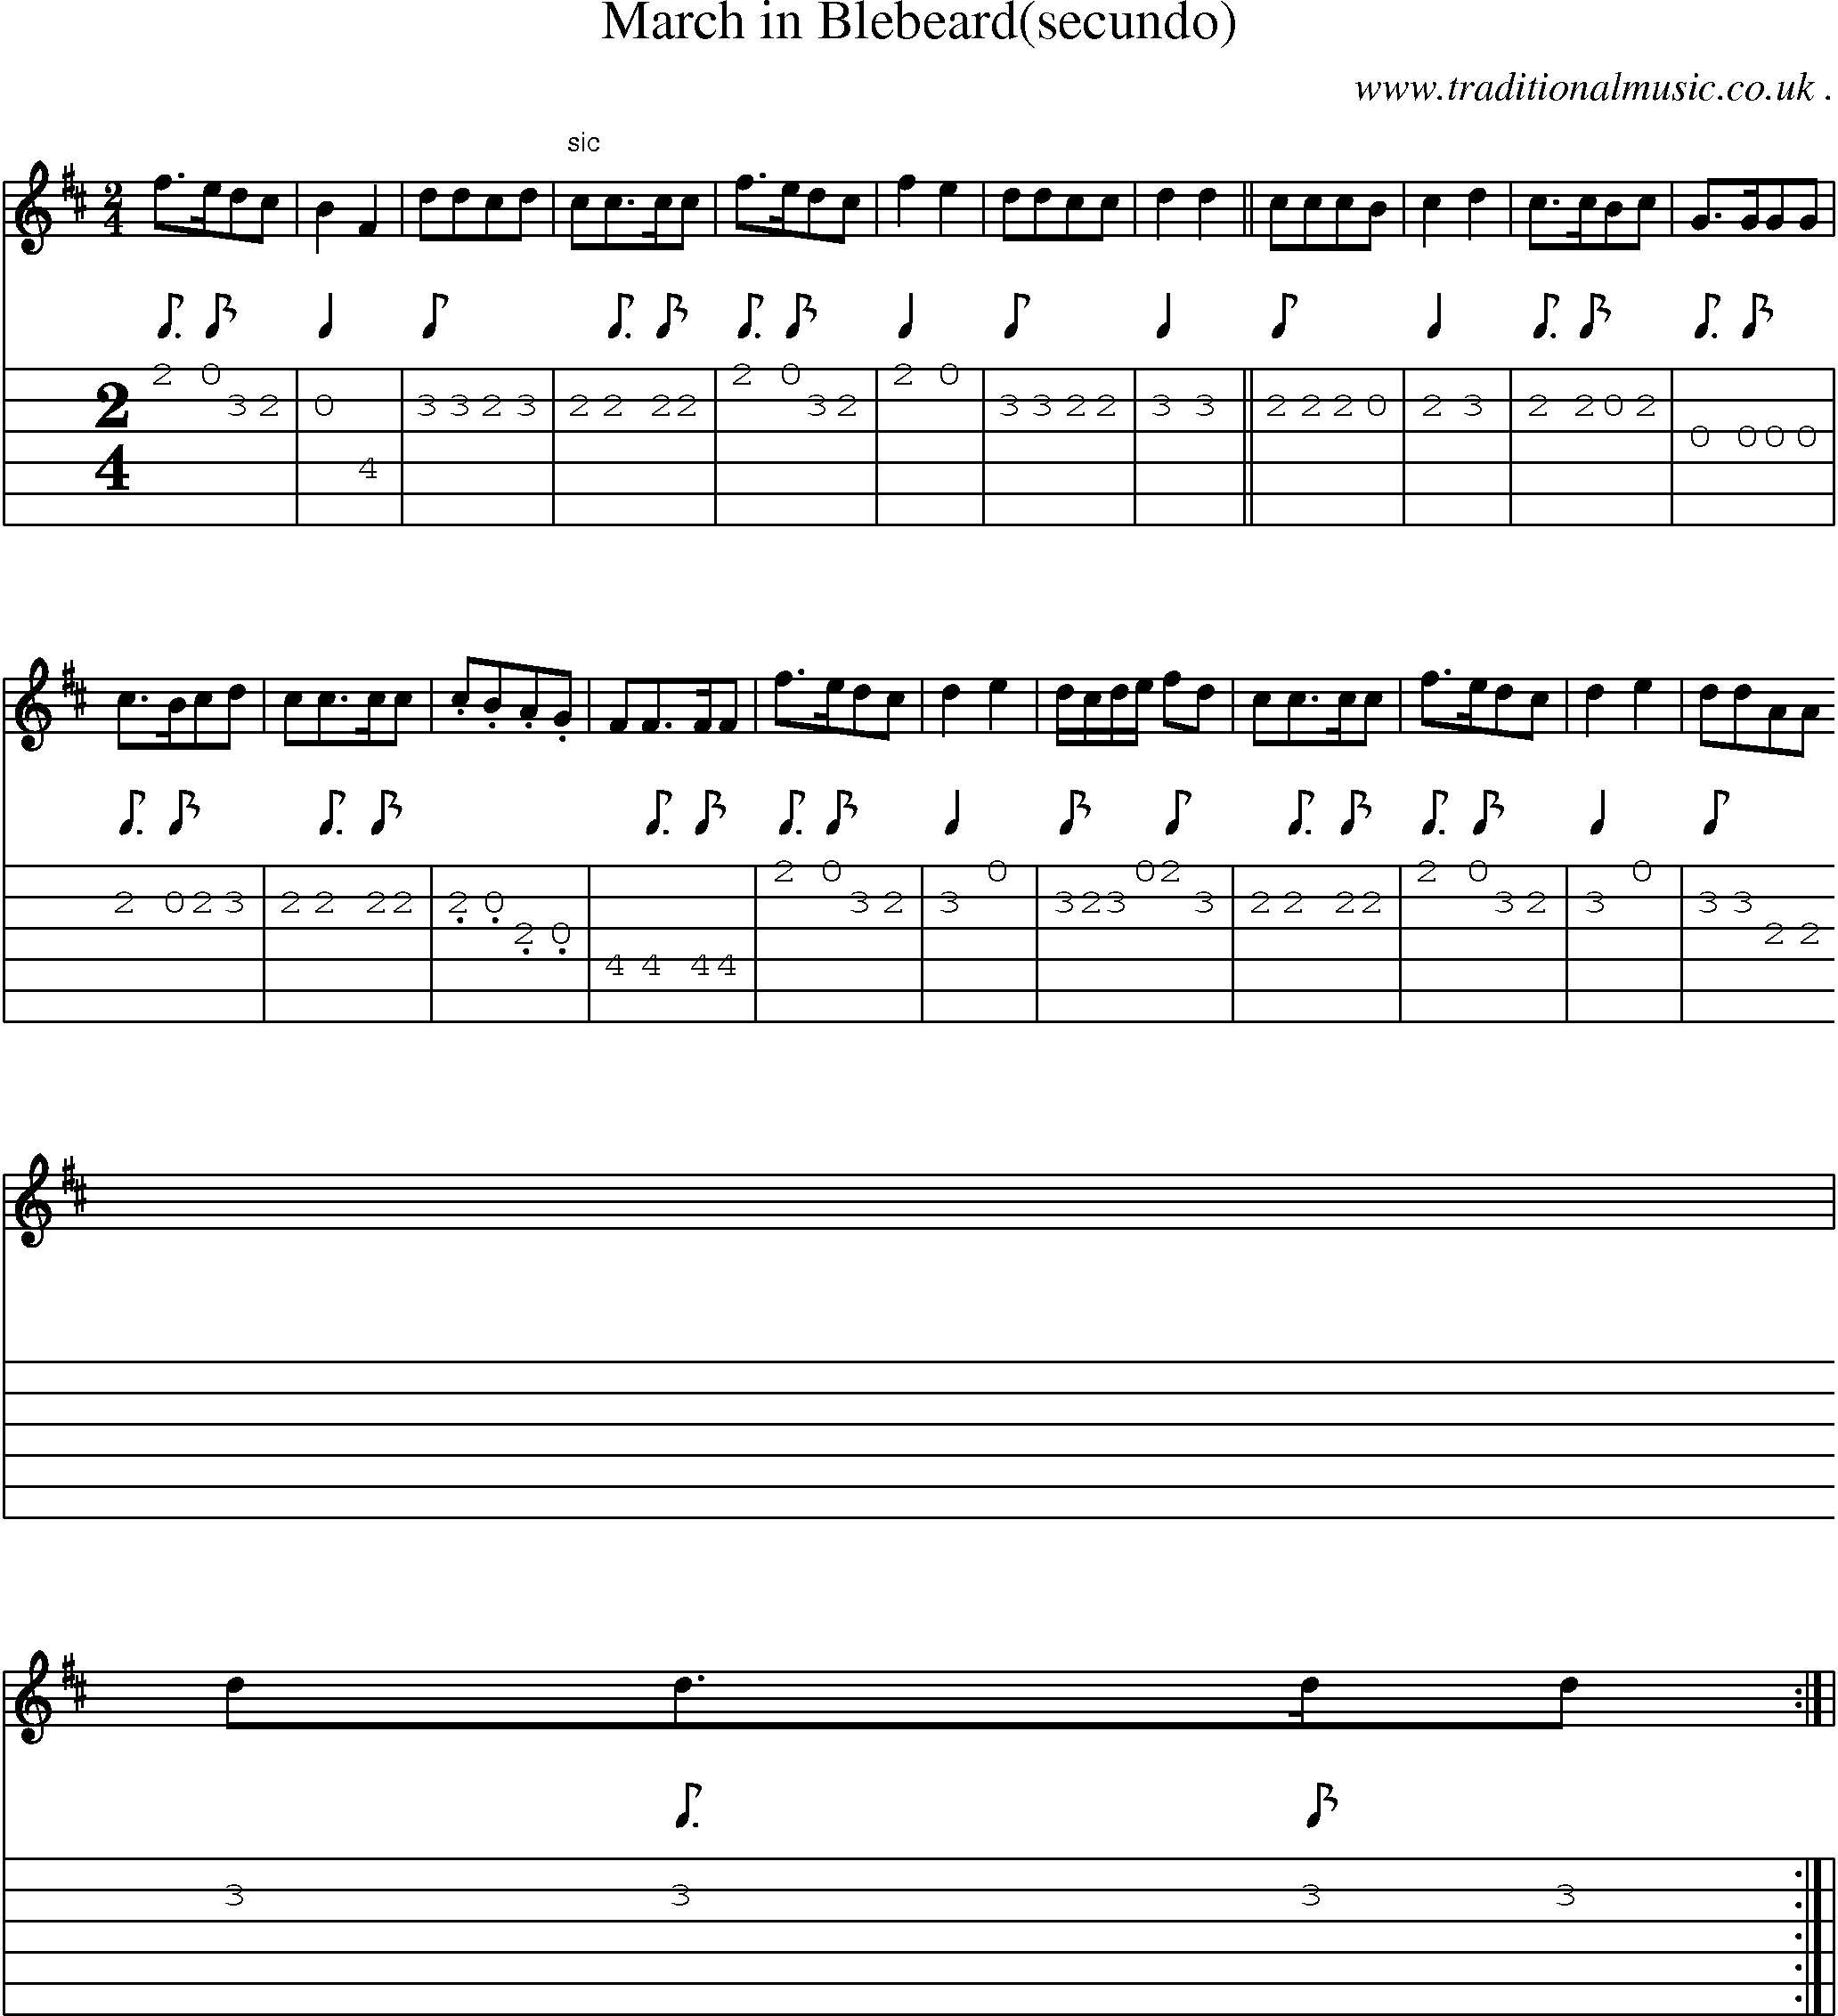 Sheet-Music and Guitar Tabs for March In Blebeard(secundo)